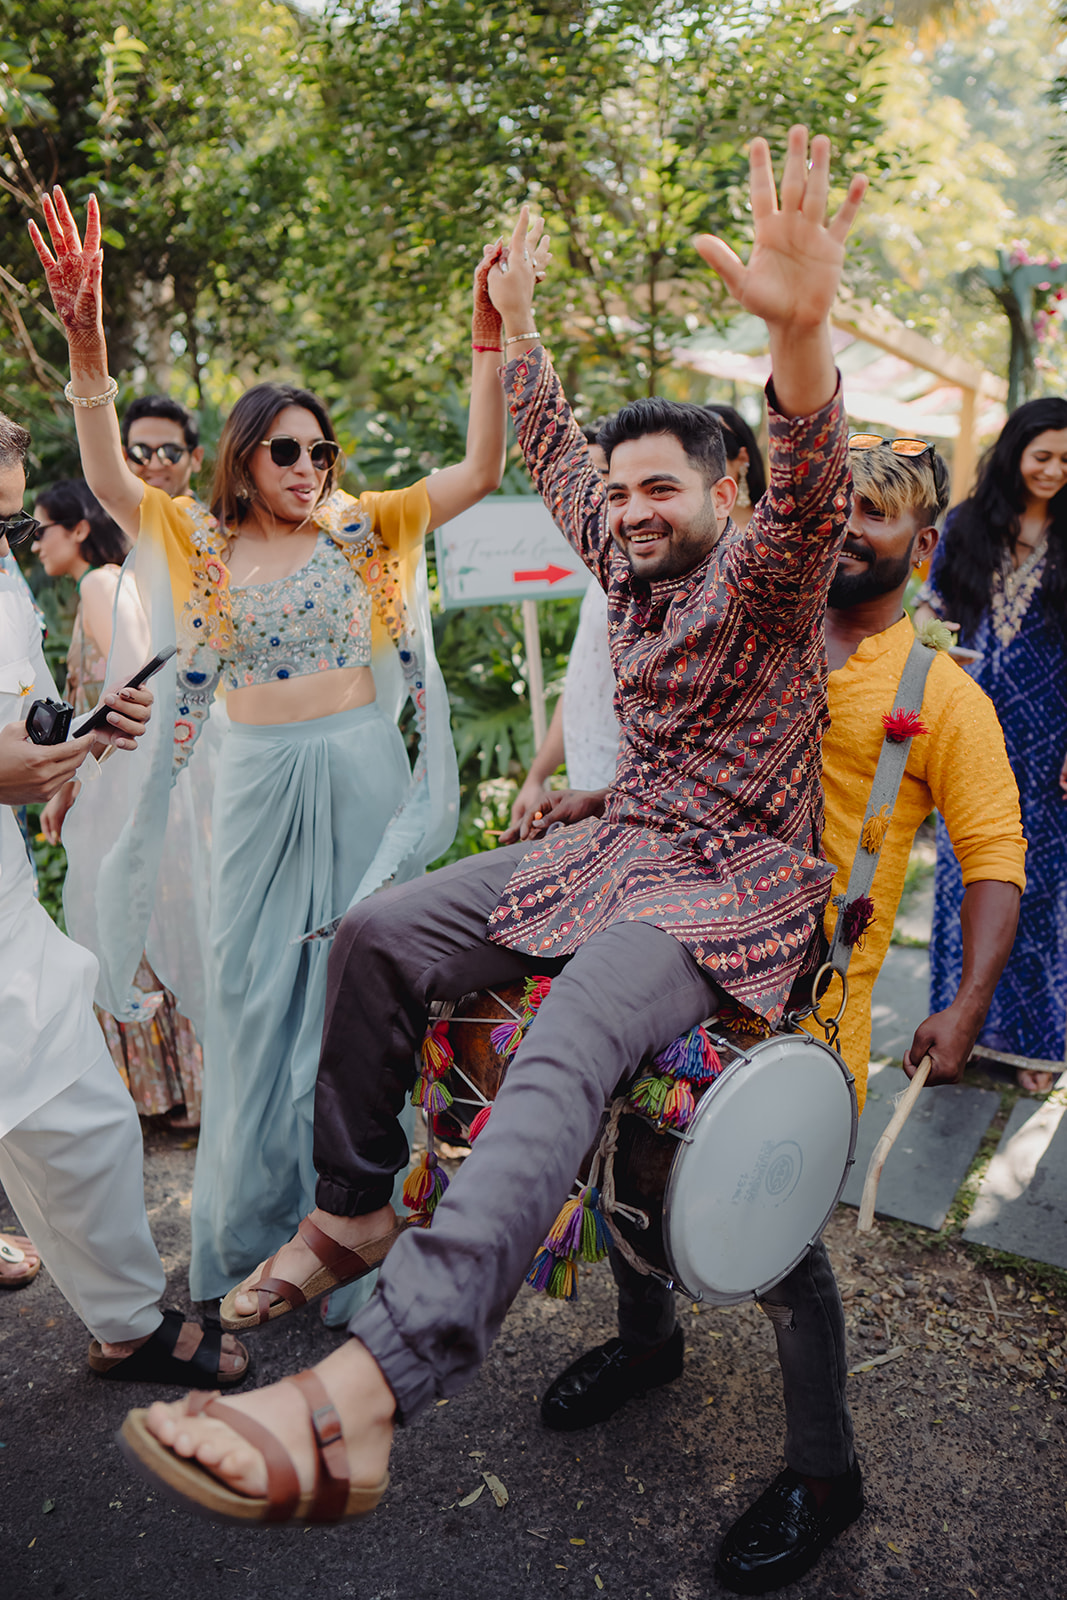 Energetic groom: Dancing with enthusiasm to the traditional dhol tunes.